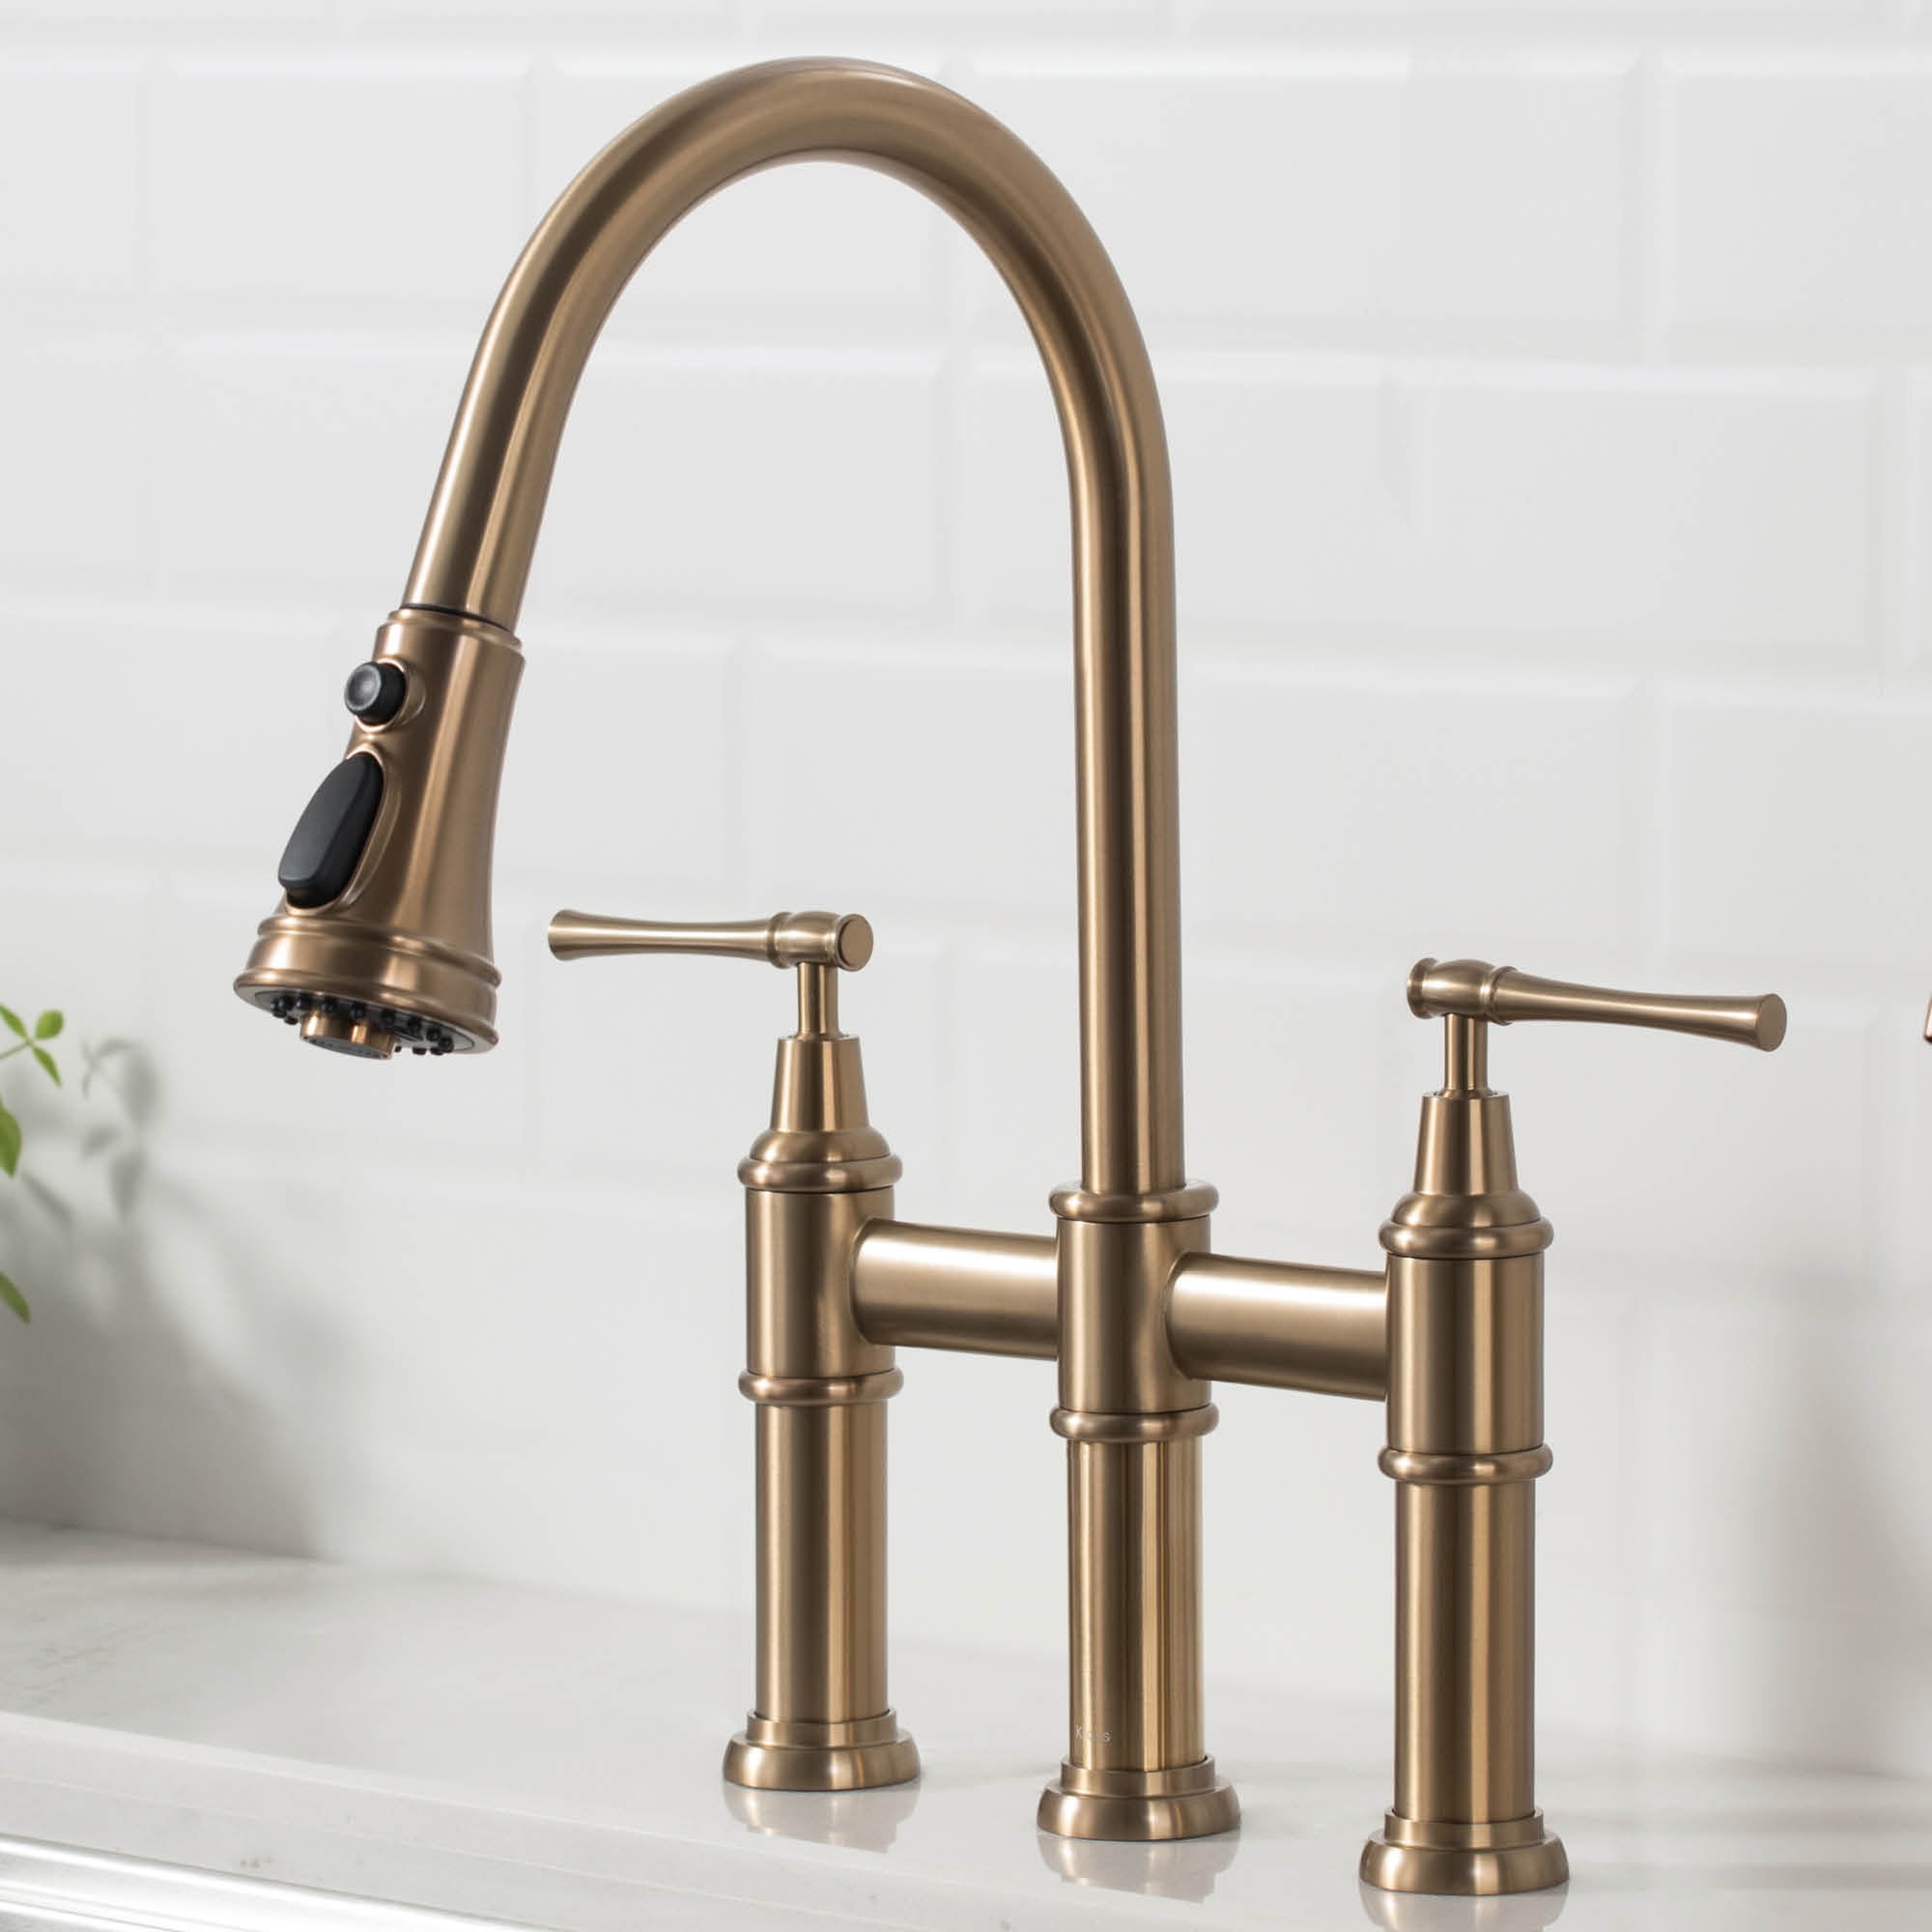 Kraus Allyn™ Transitional Bridge Kitchen Faucet with Pull-Down